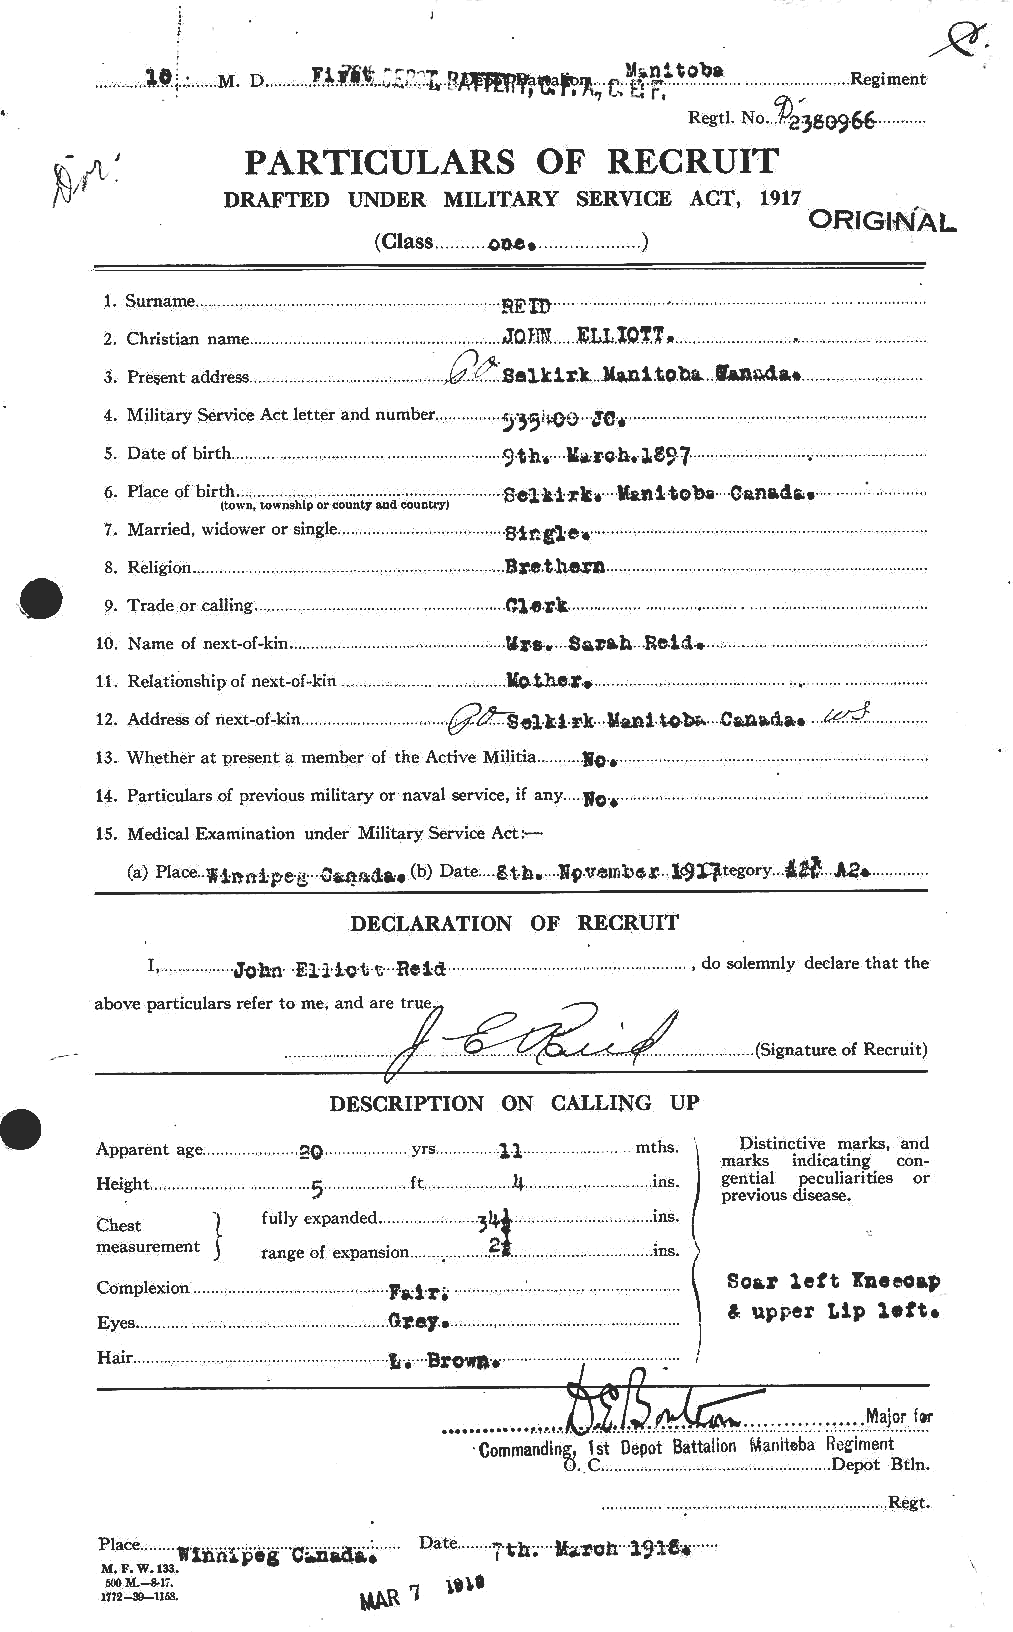 Personnel Records of the First World War - CEF 598836a